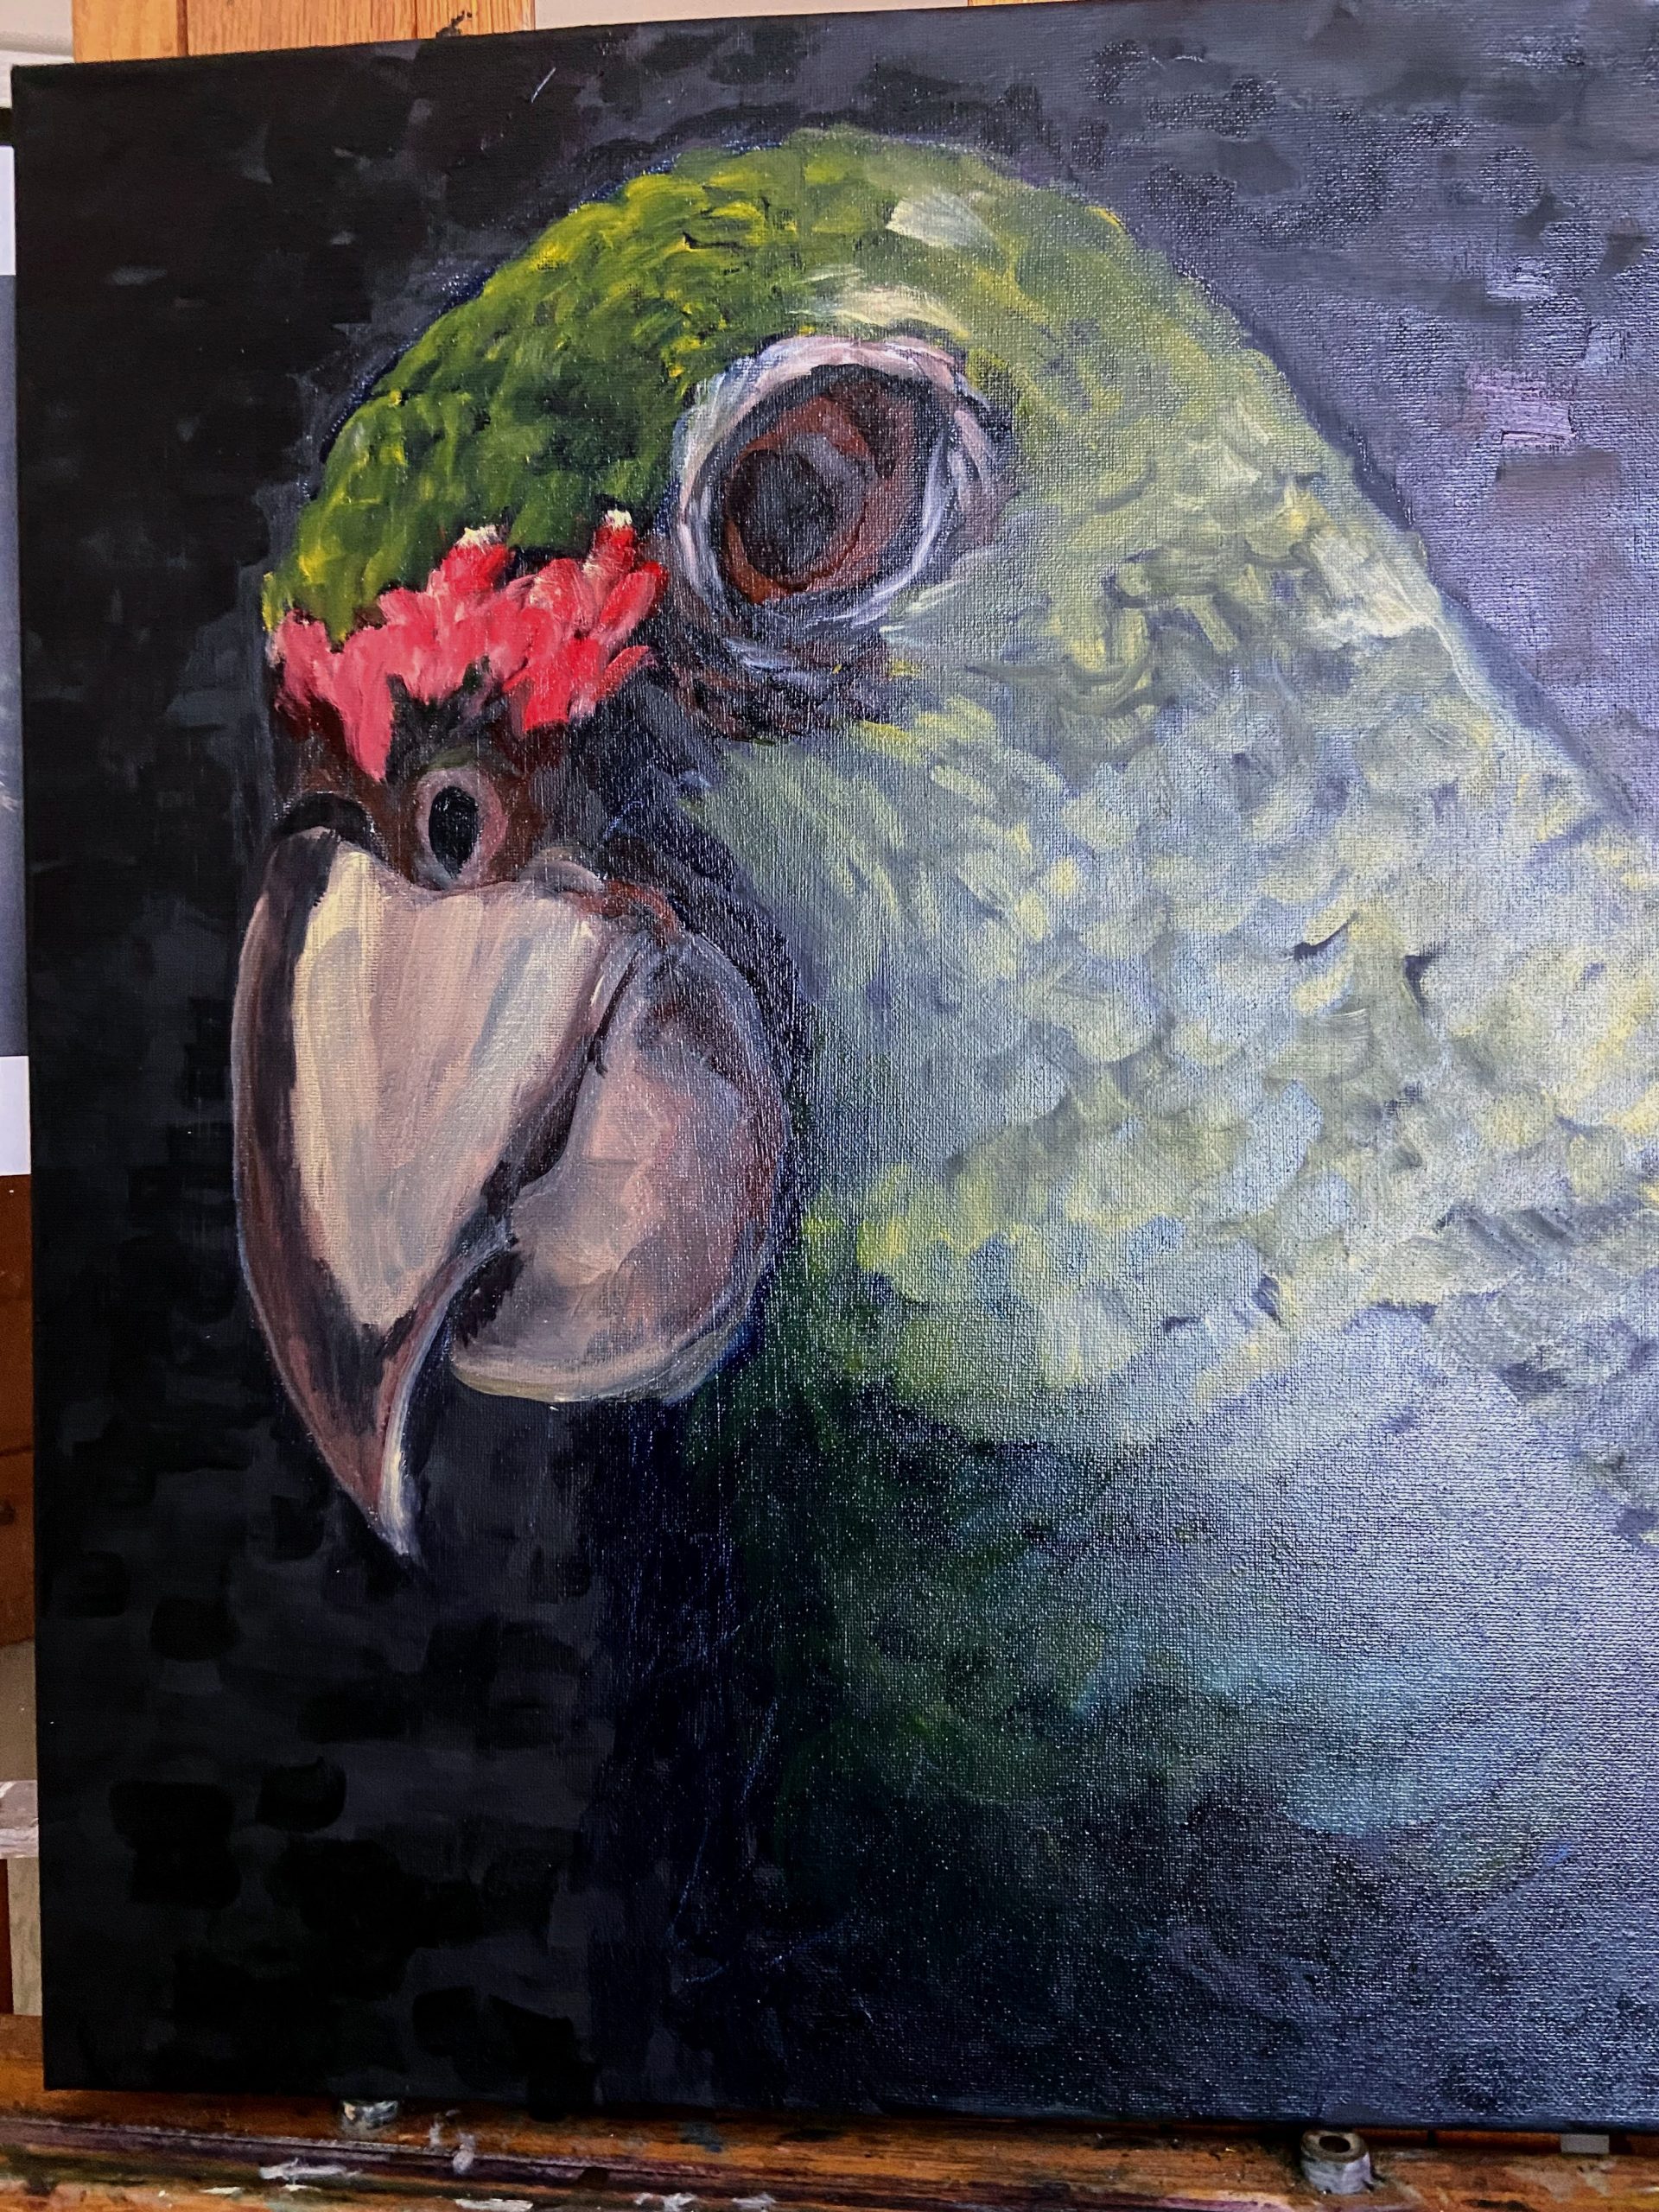 First draft painting of a parrot head done in oils